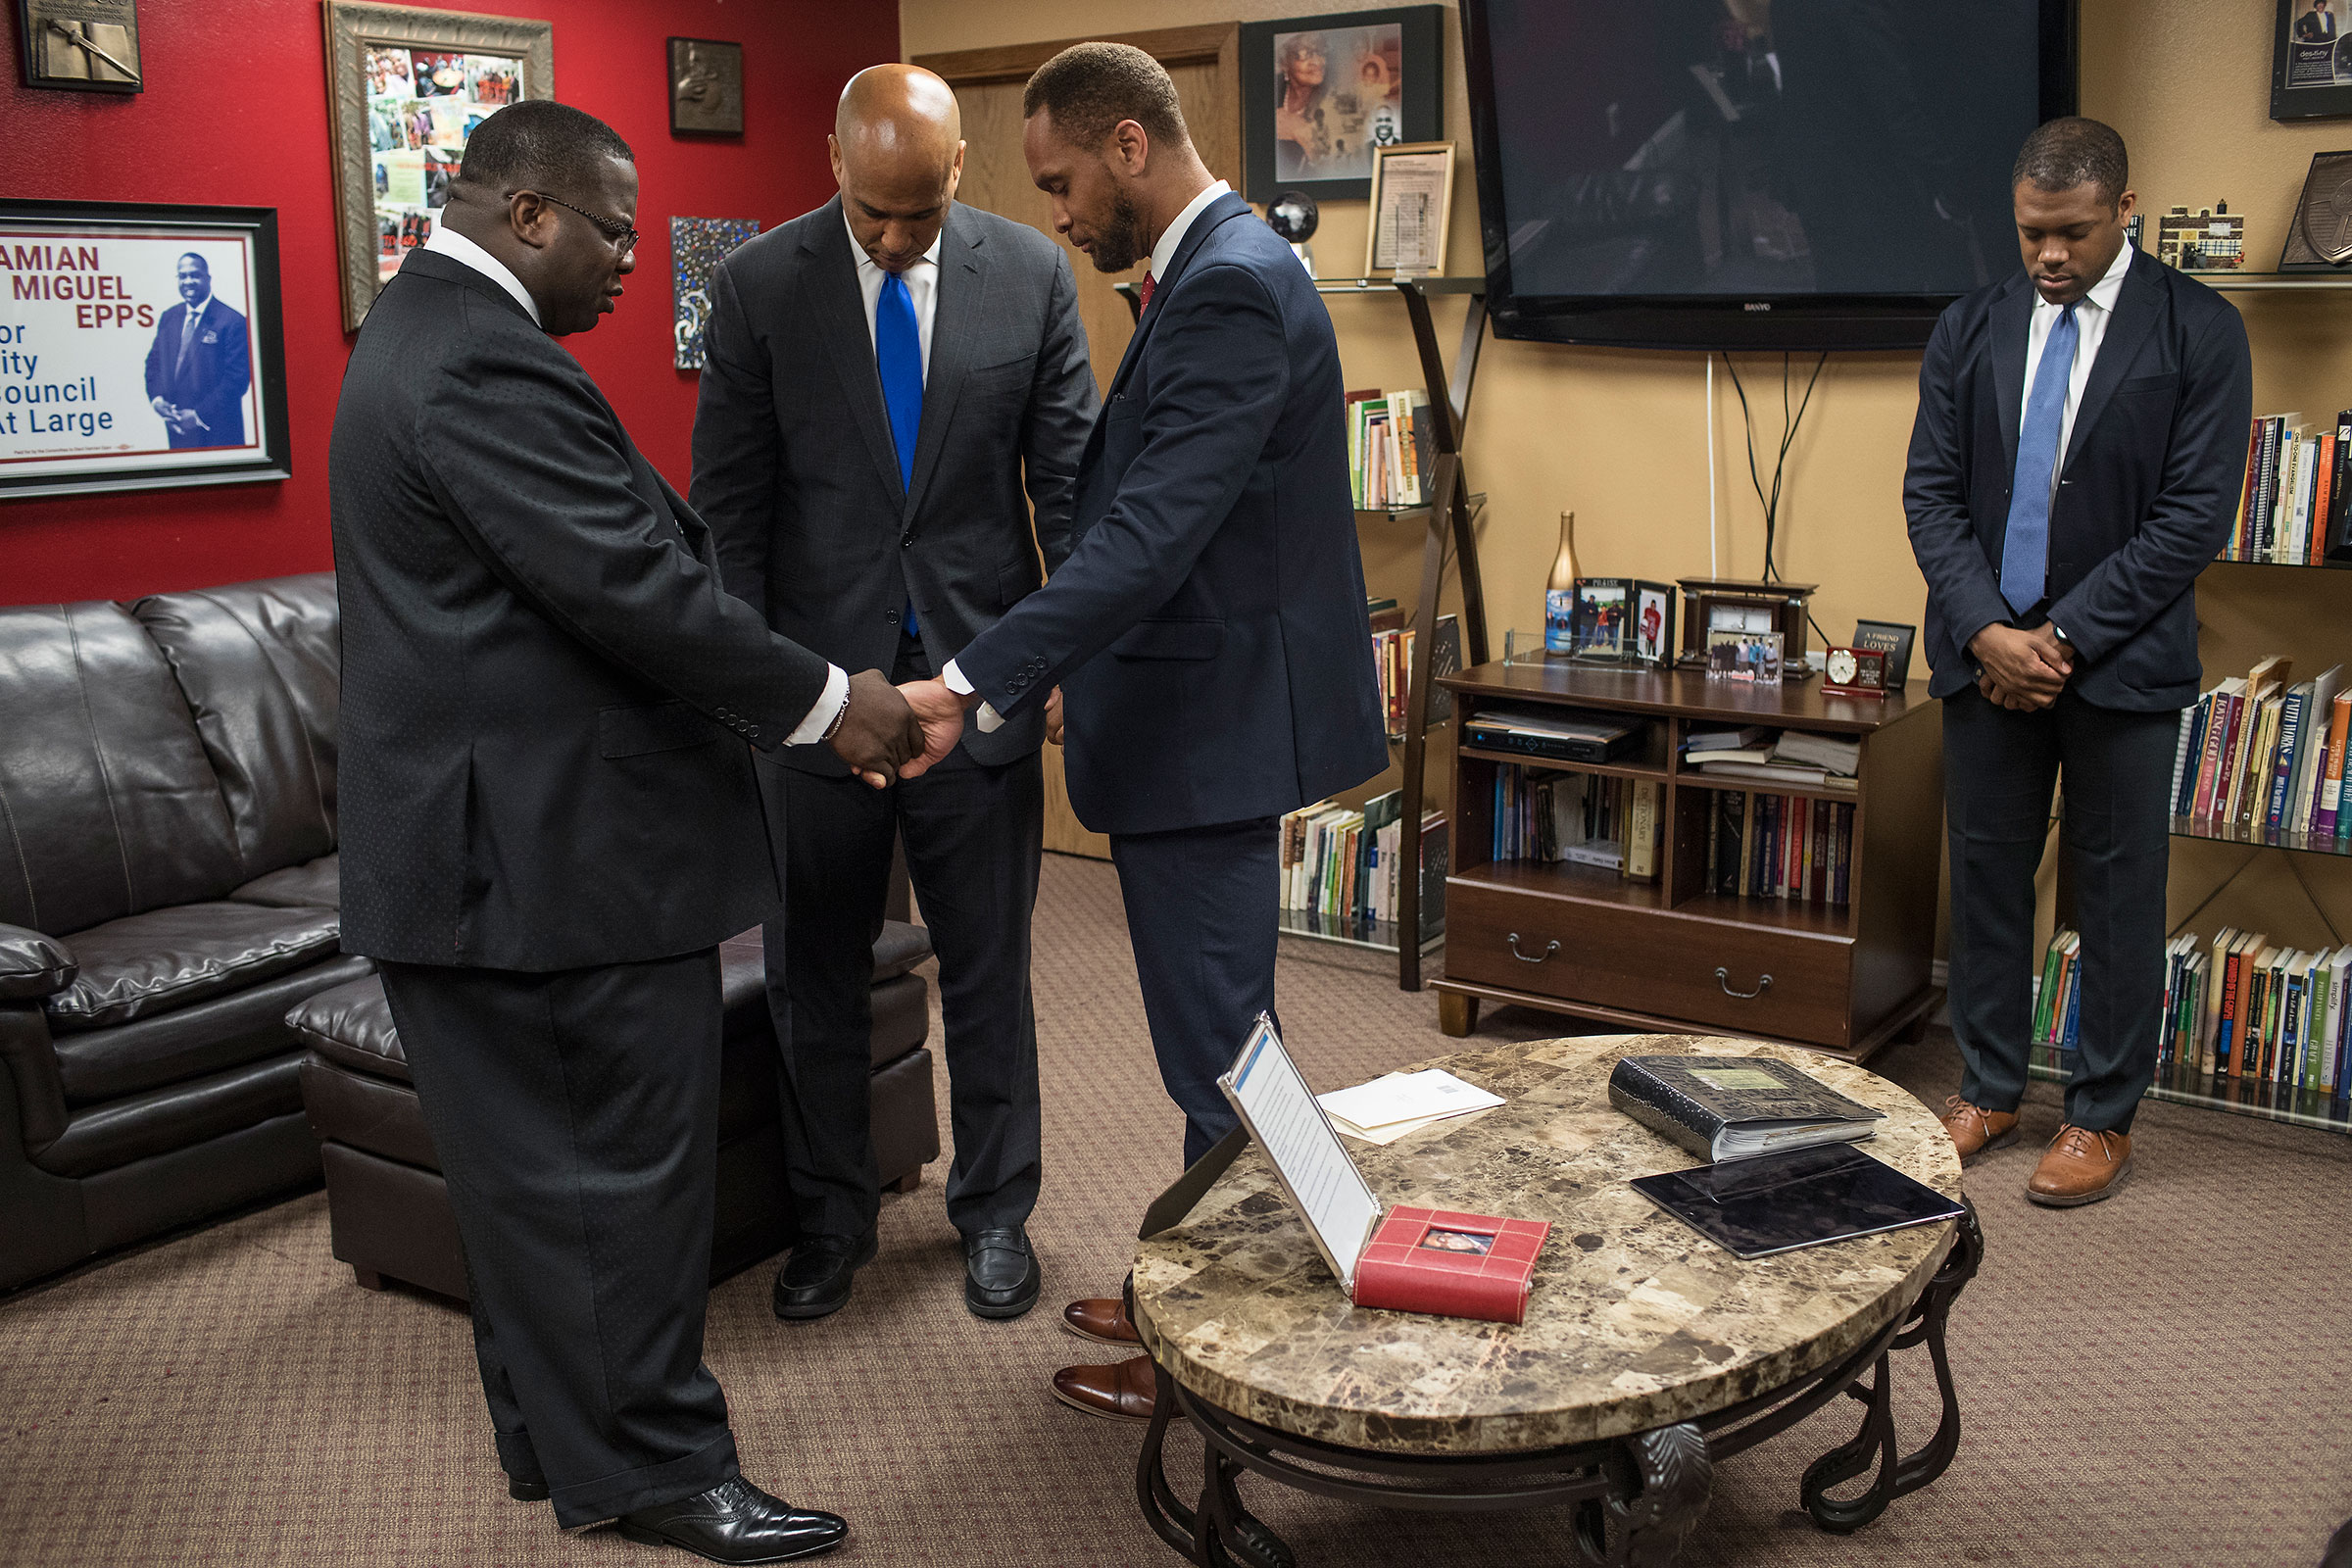 Pastor Dr. Damian Miguel Epps, Senator Cory Booker, and Linn County Supervisor Stacey Walker pray before the Youth Empowerment Day service at Mt. Zion Missionary Baptist Church in Cedar Rapids, Iowa on June 9. (Danny Wilcox Frazier—VII for TIME)